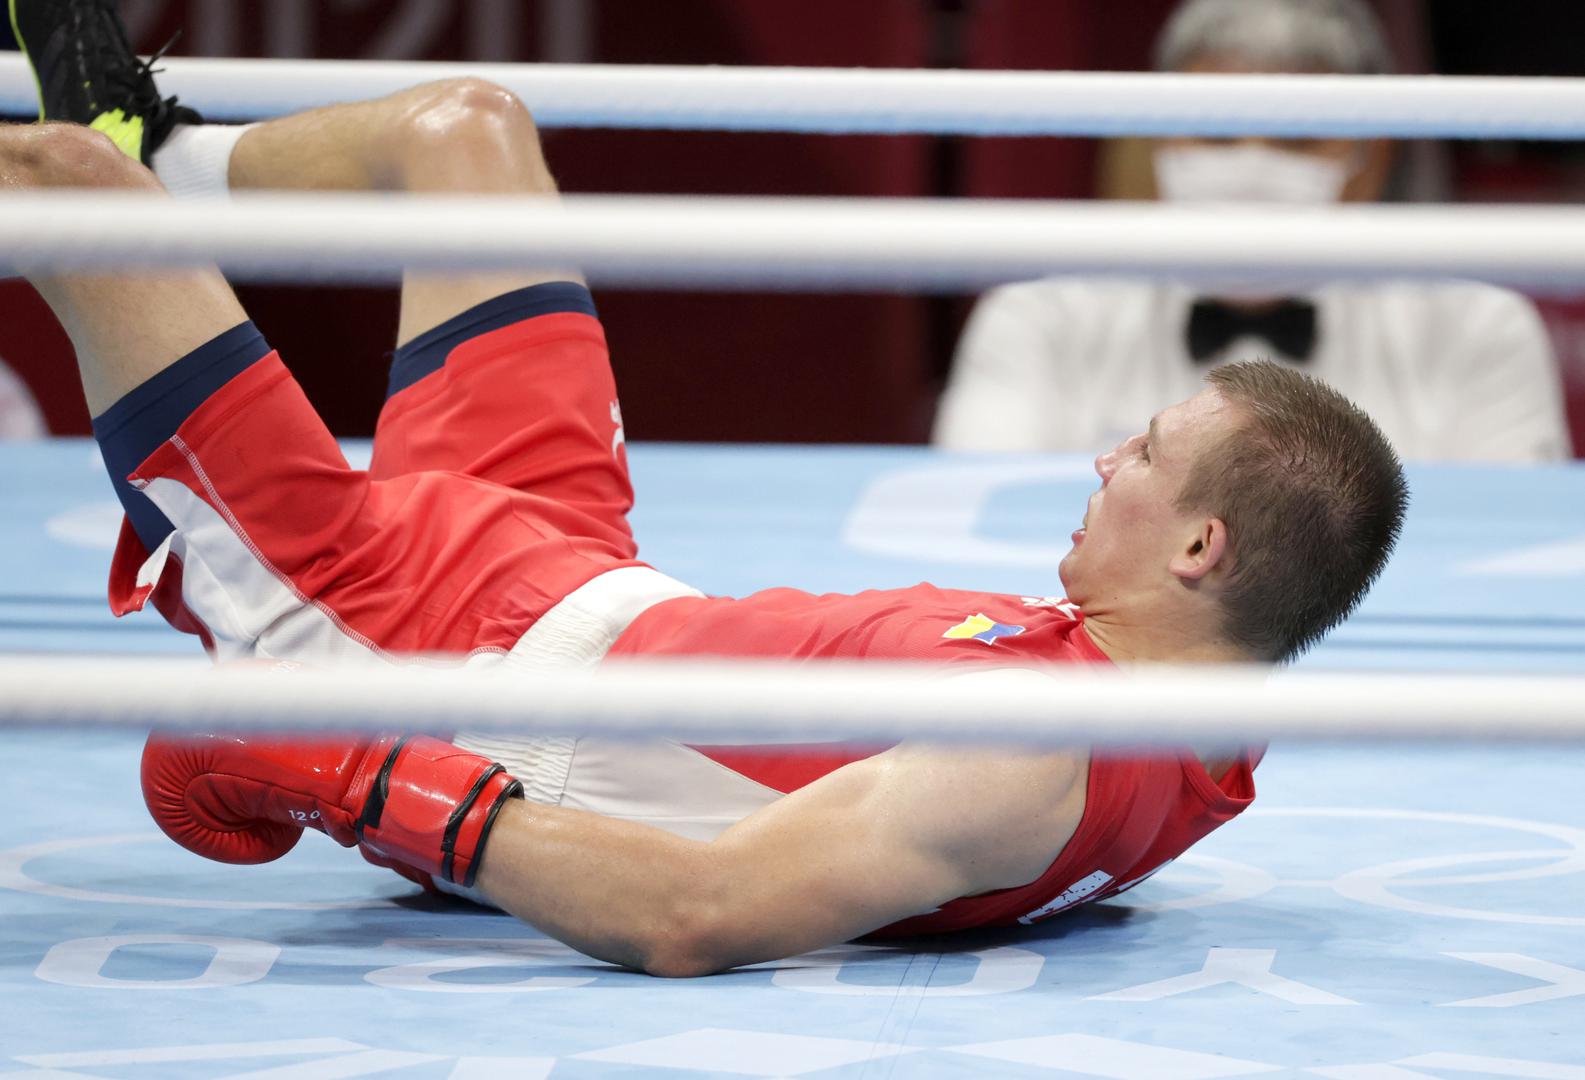 Boxing - Men's Middleweight - Final Tokyo 2020 Olympics - Boxing - Men's Middleweight - Final - Kokugikan Arena - Tokyo, Japan - August 7, 2021. Oleksandr Khyzhniak of Ukraine lies on the ground after being knocked down during his fight against Hebert Sousa of Brazil REUTERS/Ueslei Marcelino UESLEI MARCELINO